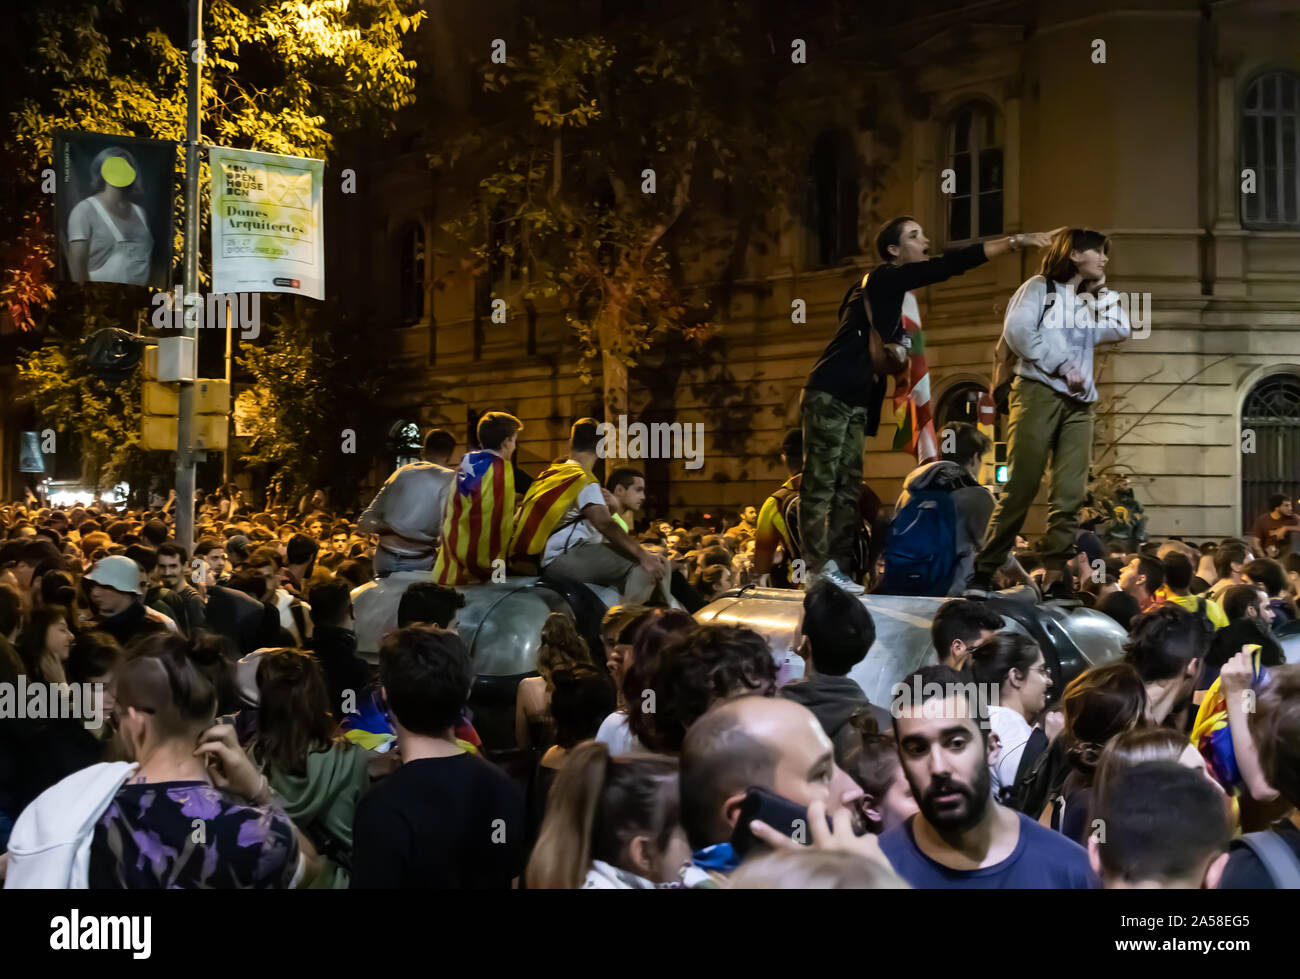 Barcelona, Spain - October 18th, 2019: Protests held during the general strike of Catalonia near Via Laietana. Rally named Marches for Freedom. Stock Photo